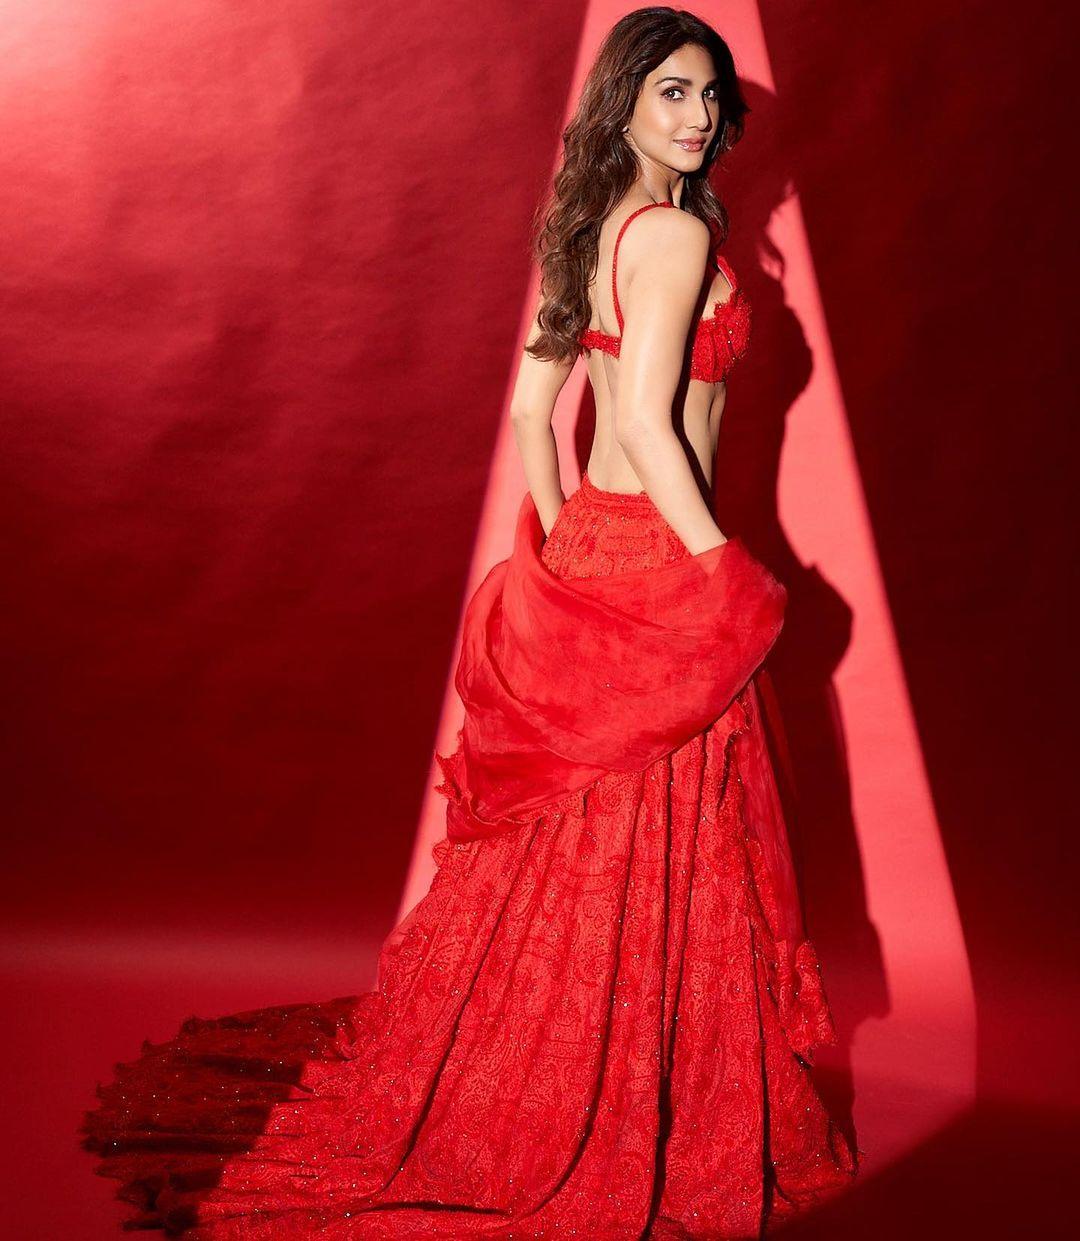 She rocked this jaw-dropping crimson lehenga that had everyone's eyes glued to her. Vaani went for this scarlet look with a deep v-neck bralette that had these delicate floral lace details.